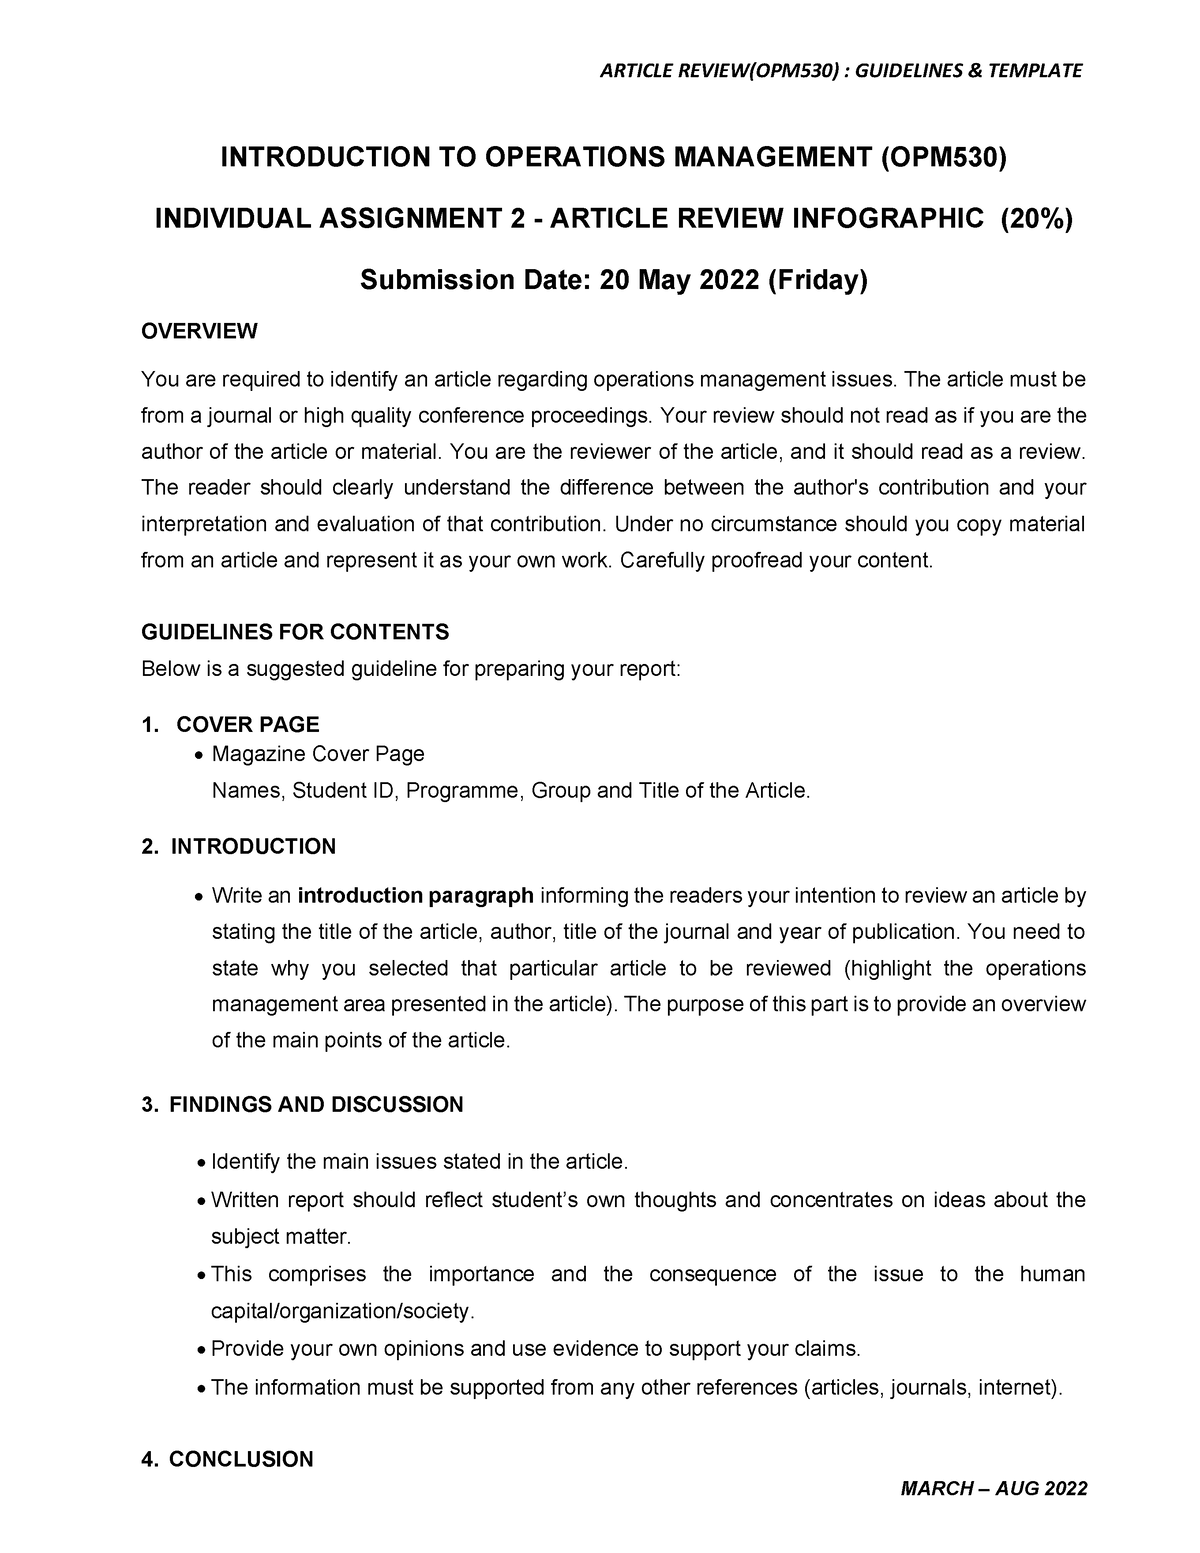 opm530 individual assignment article review nestle